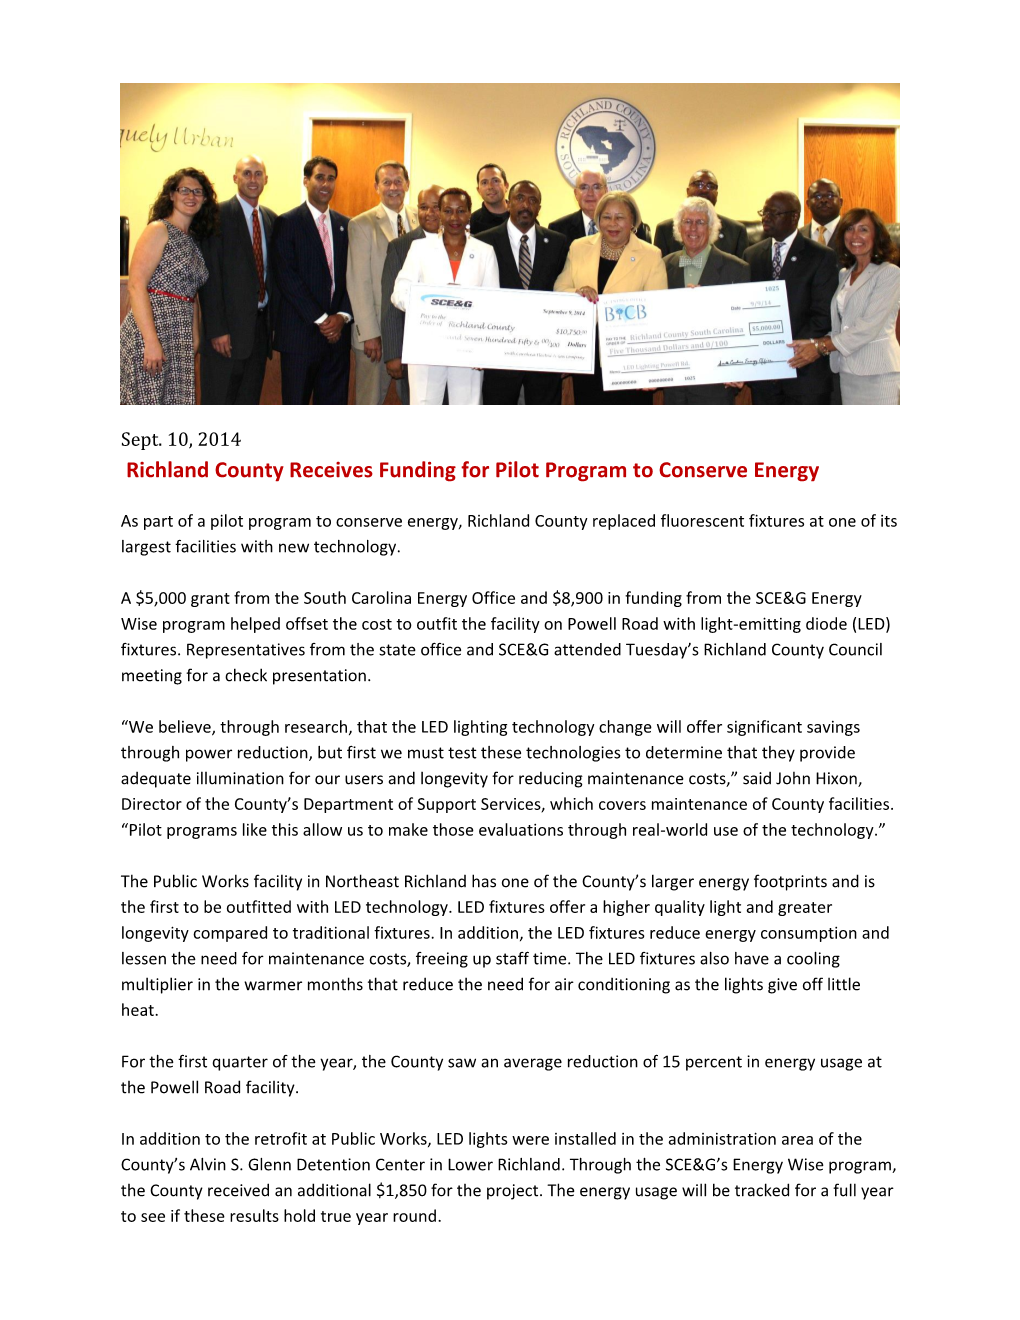 Richland County Receives Funding for Pilot Program to Conserve Energy